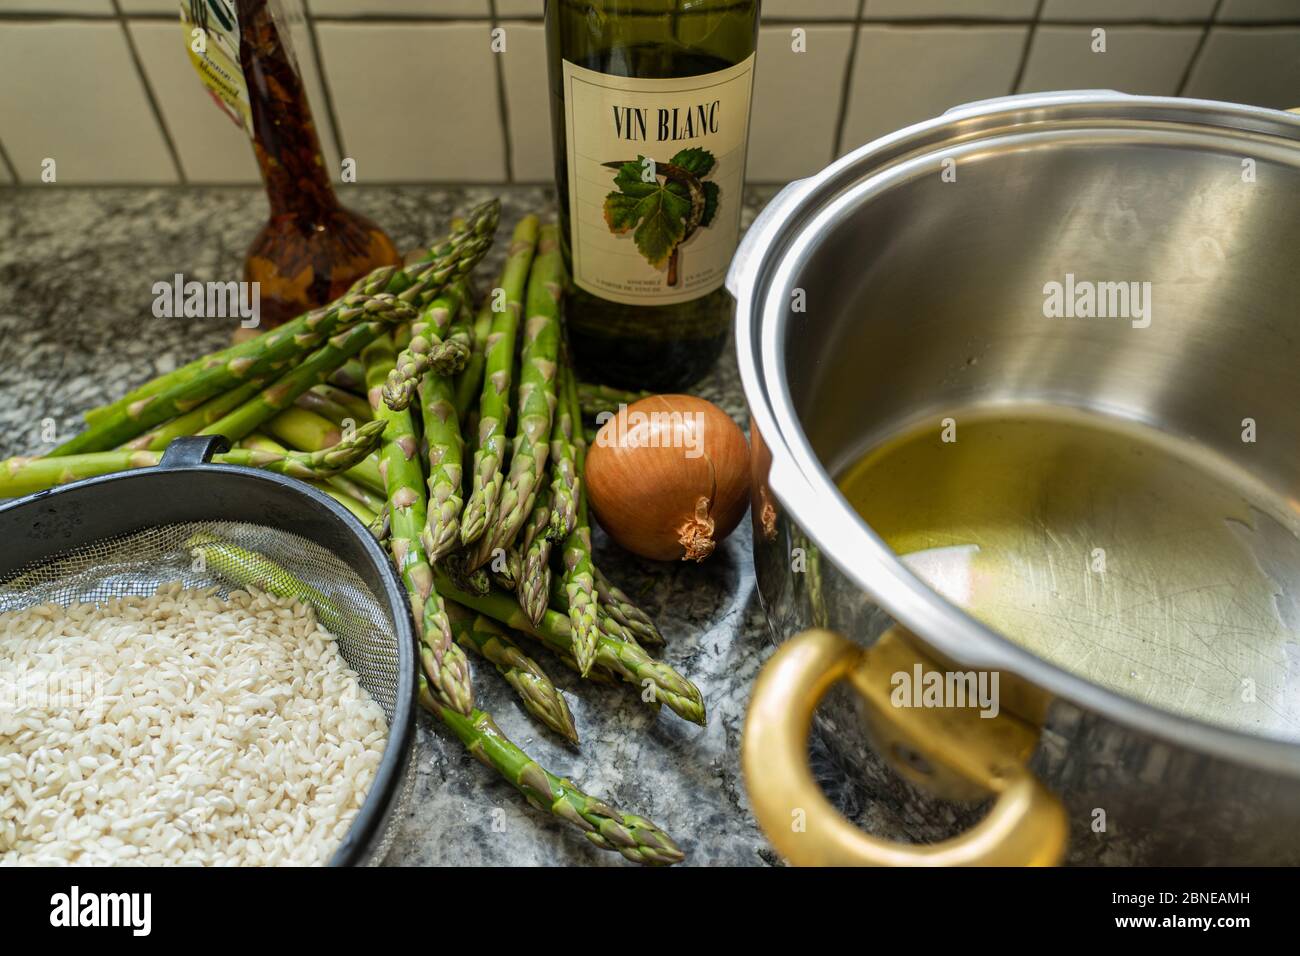 Cooking some Risotto rice with asparagus, onion and white wine. Pan with olive oil on granite background. High angle view. Stock Photo